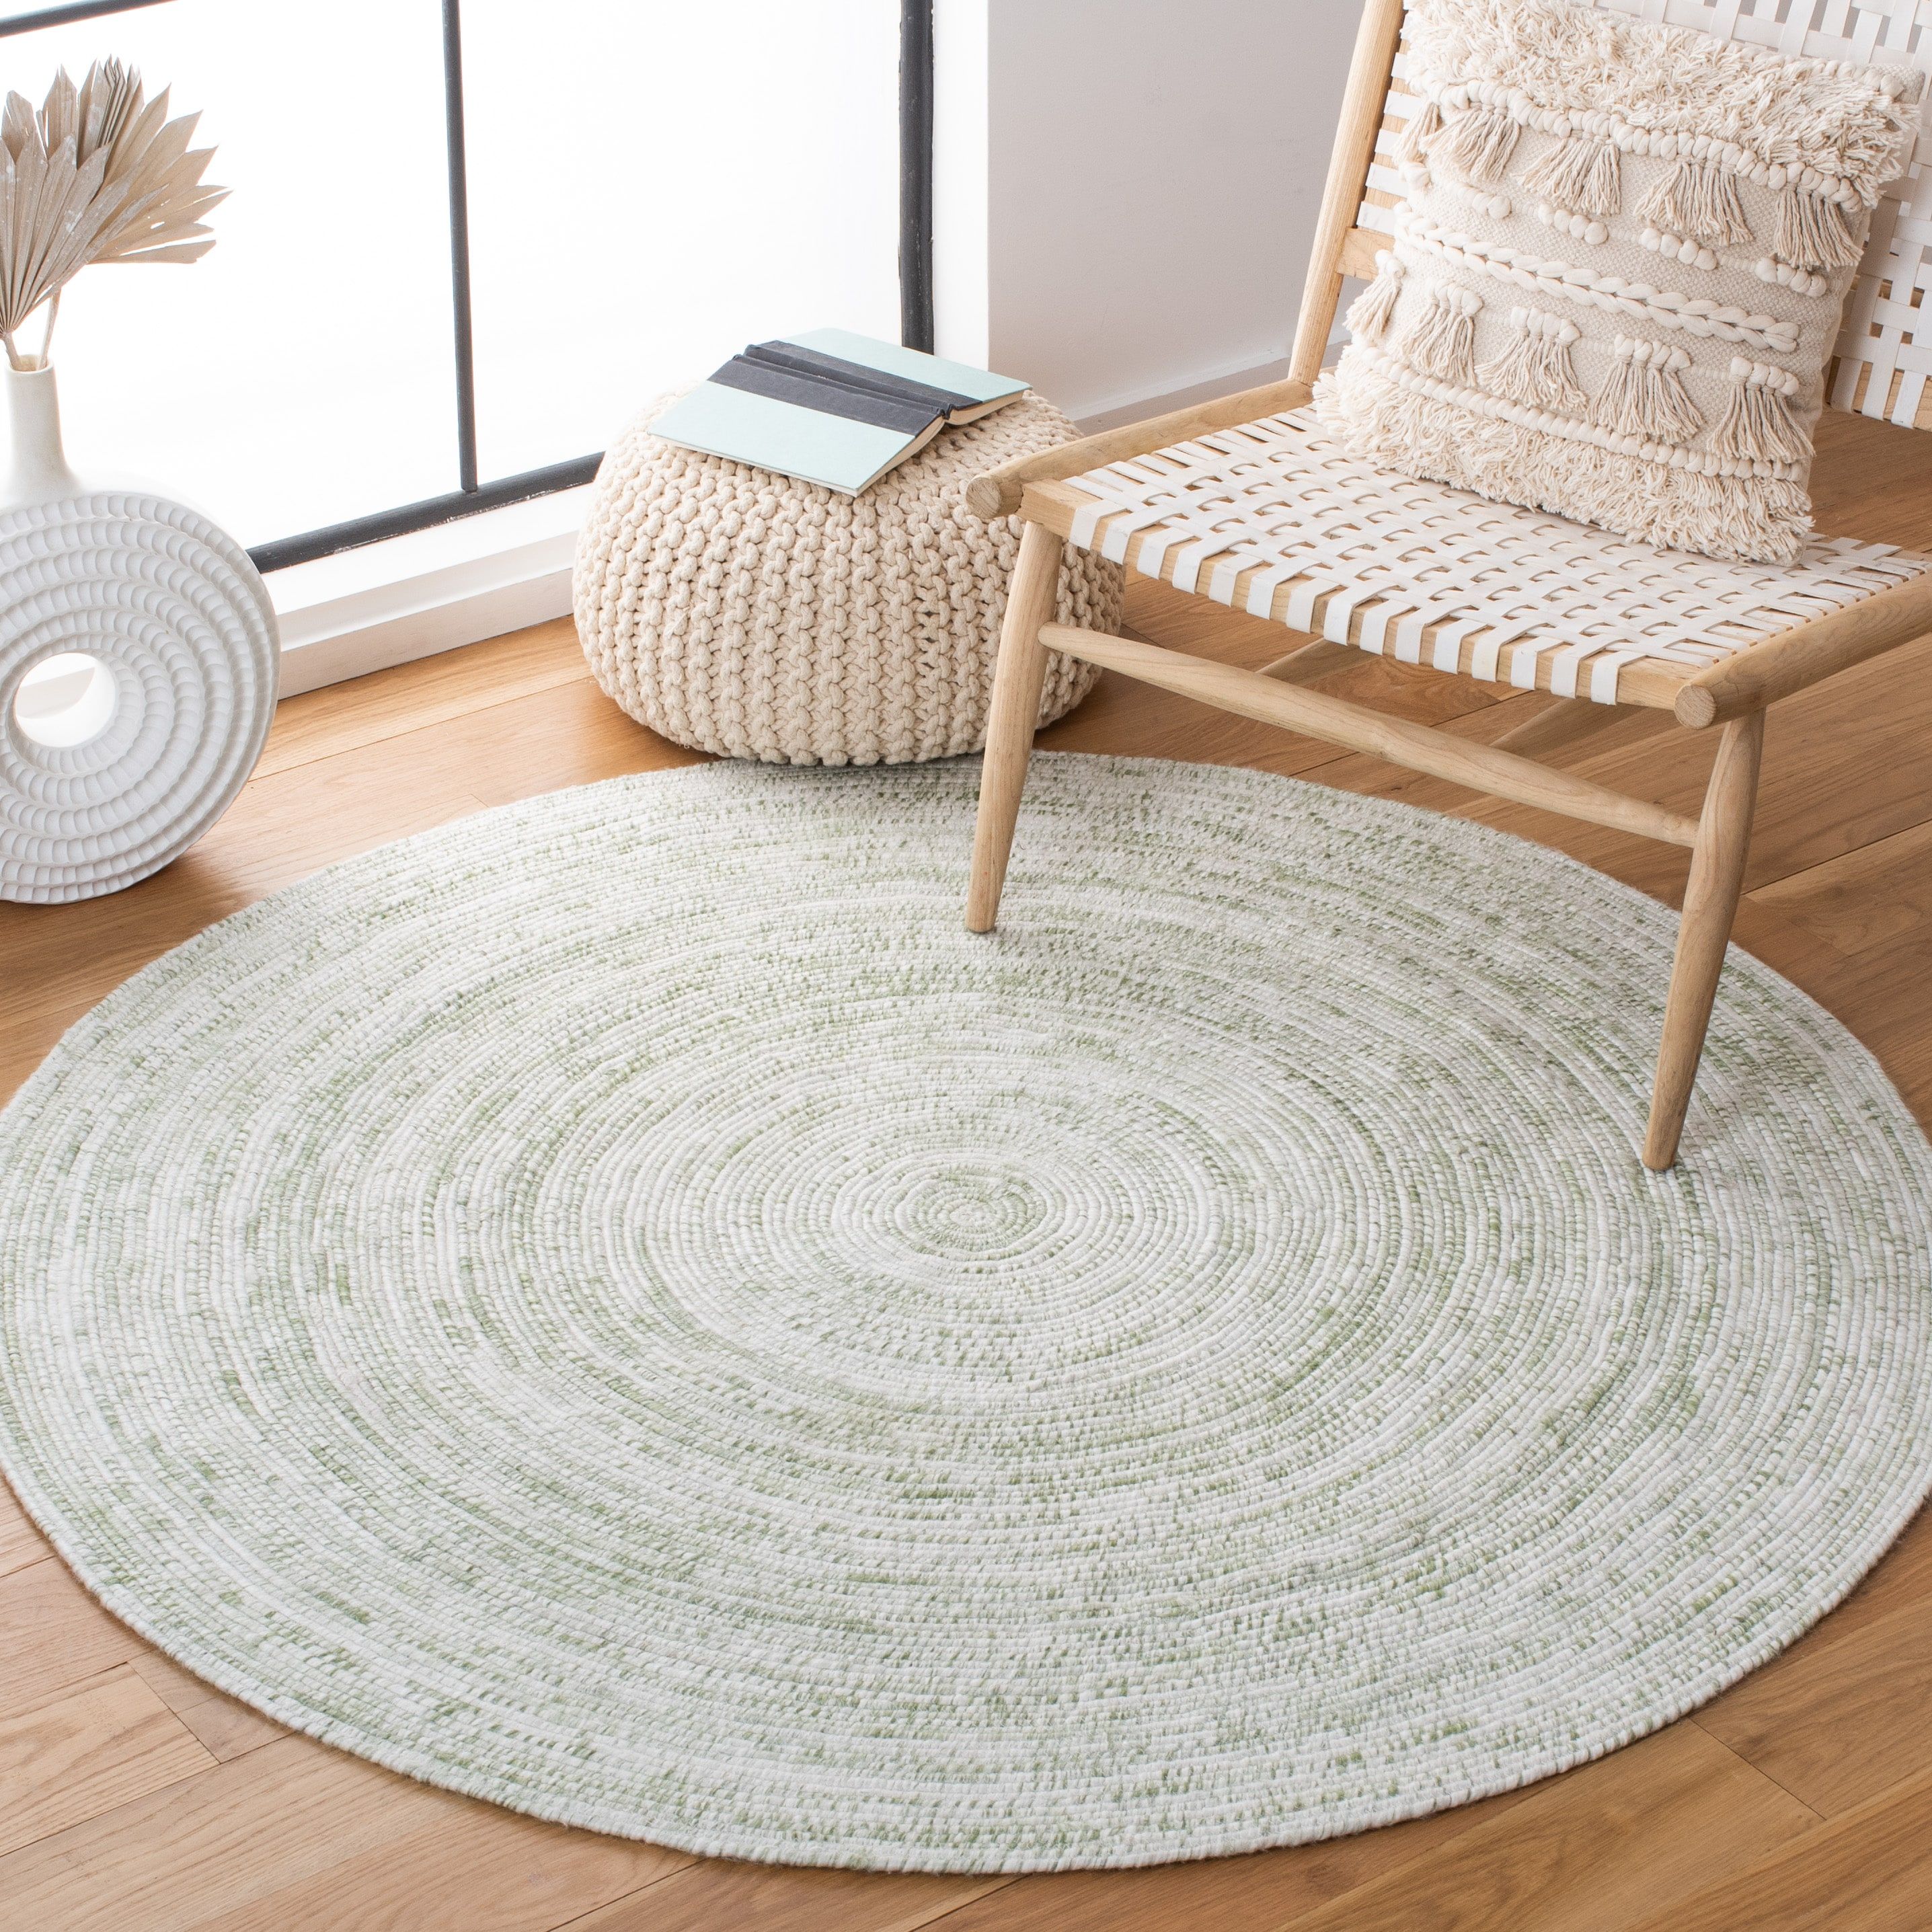 Safavieh 4 X 4 Braided Ivory/green Round Indoor Abstract Farmhouse/cottage  Area Rug In The Rugs Department At Lowes In Gray Bamboo Round Rugs (View 12 of 15)